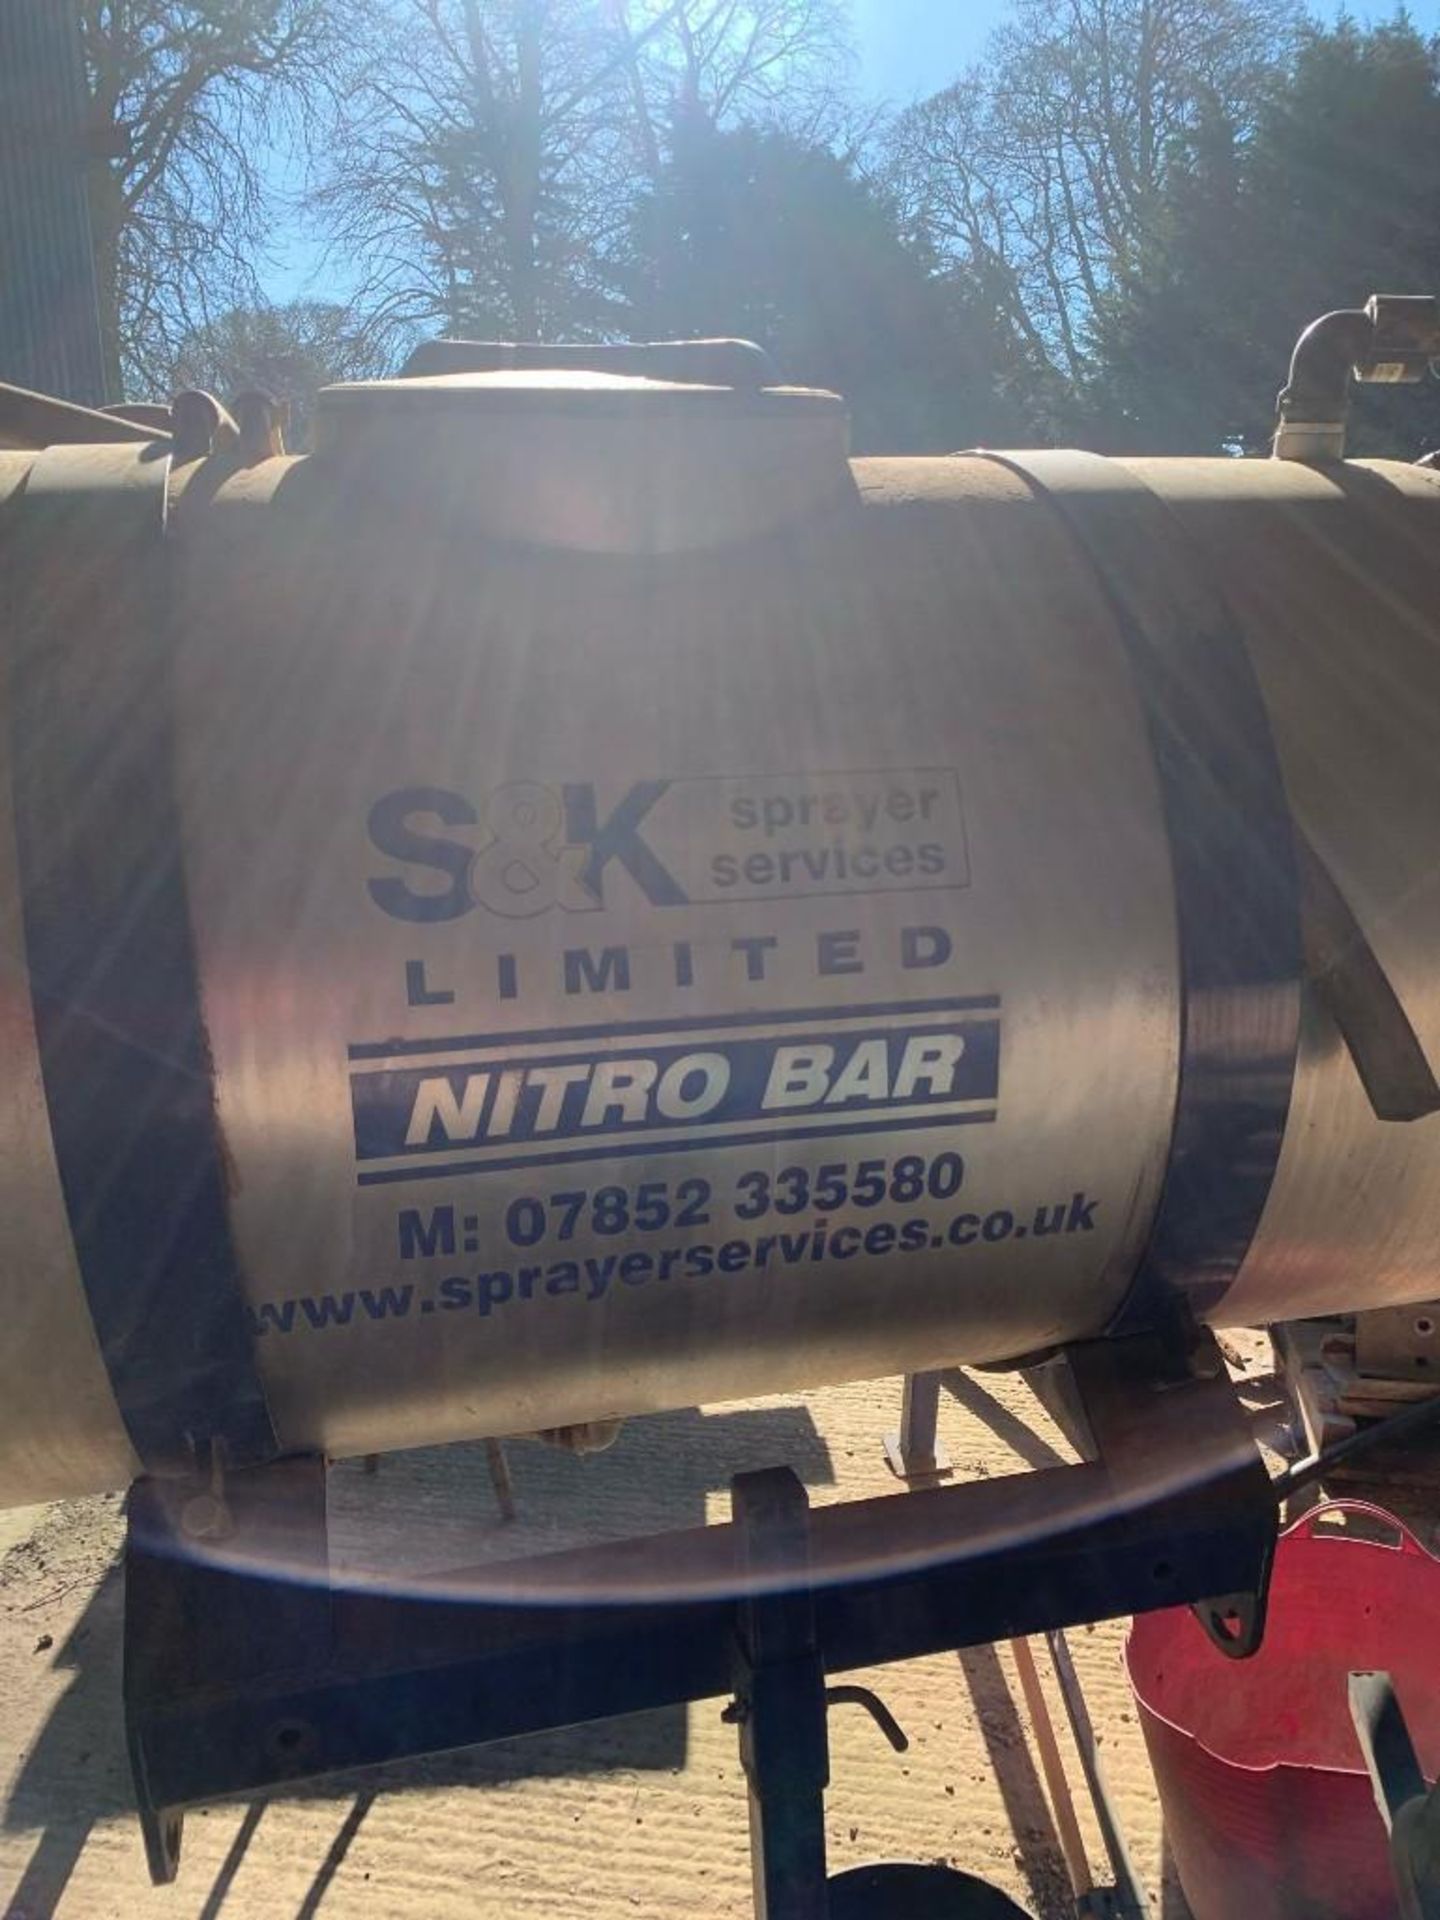 S & K Ltd Stainless Steel Front Tank - (Lincolnshire) - Image 4 of 6